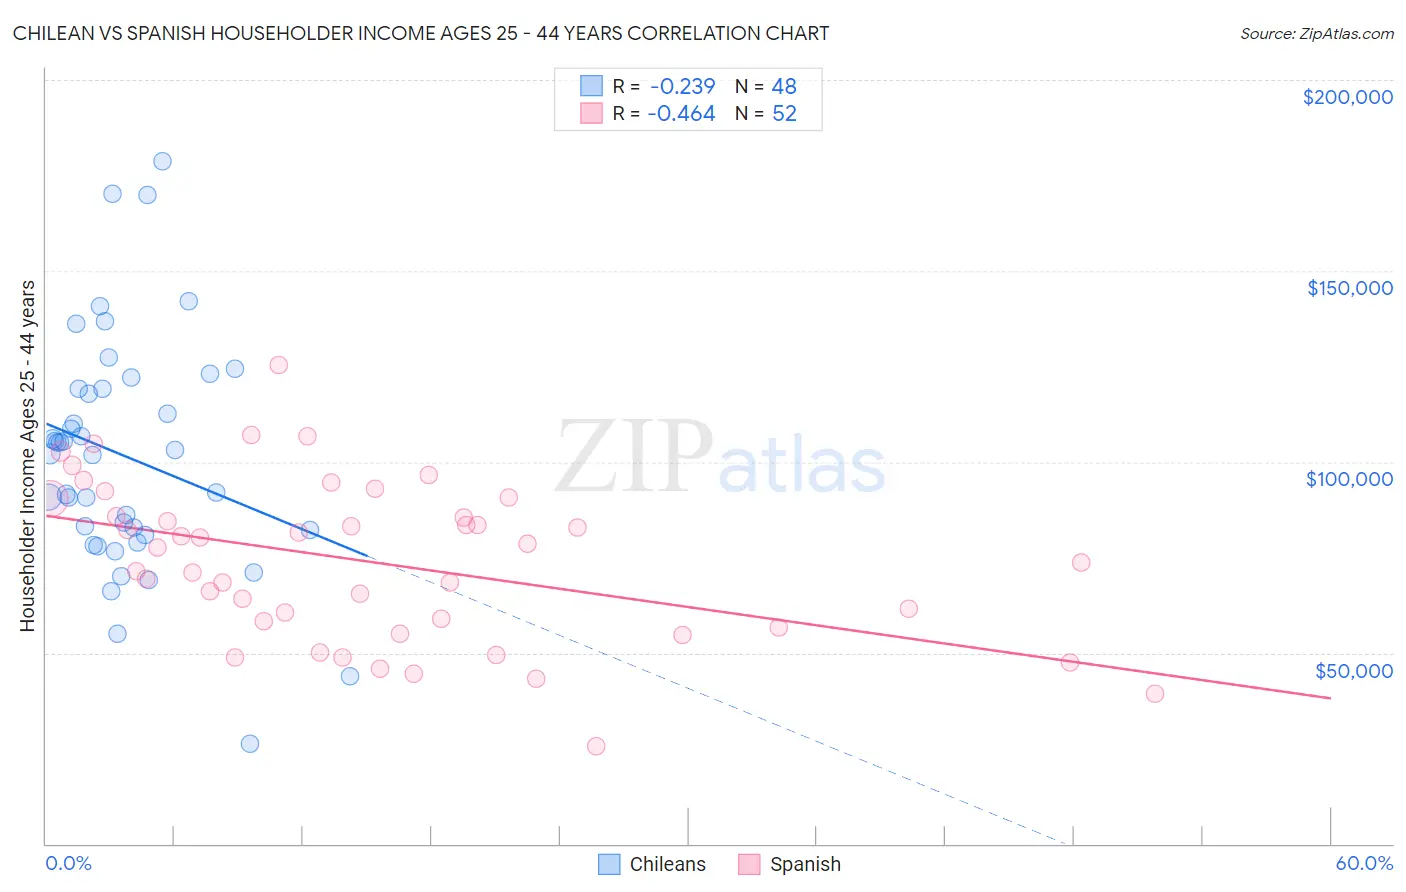 Chilean vs Spanish Householder Income Ages 25 - 44 years